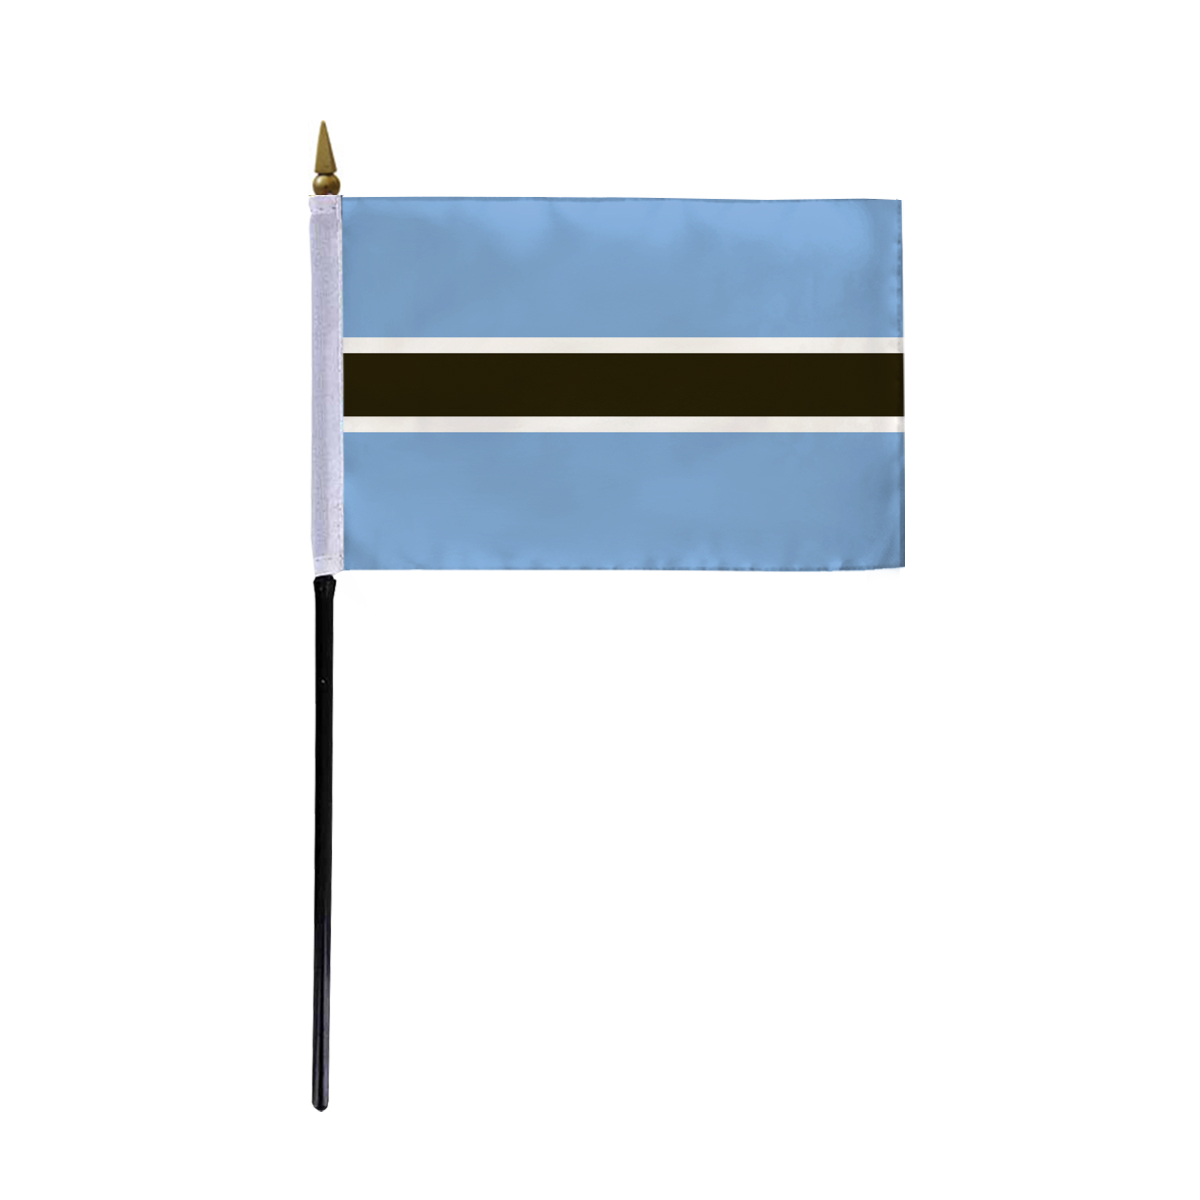 AGAS Small Botswana National Flag 4x6 inch